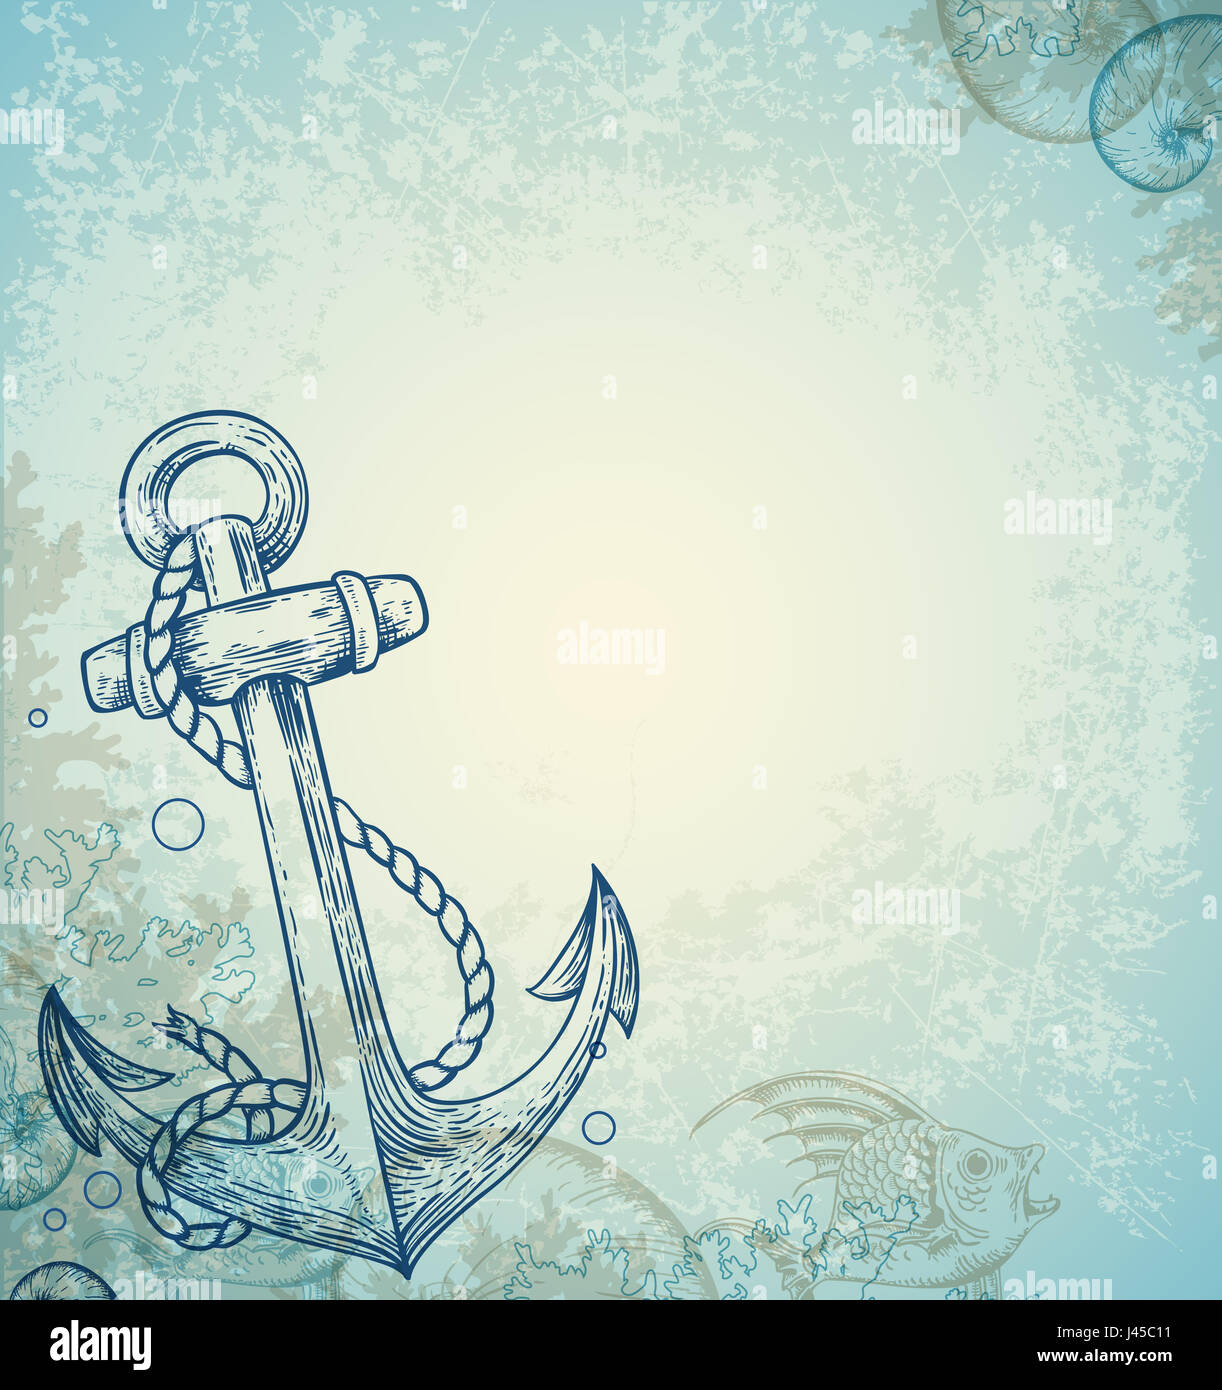 Vintage marine background with anchor and fish. Hand drawn illustration. Stock Photo